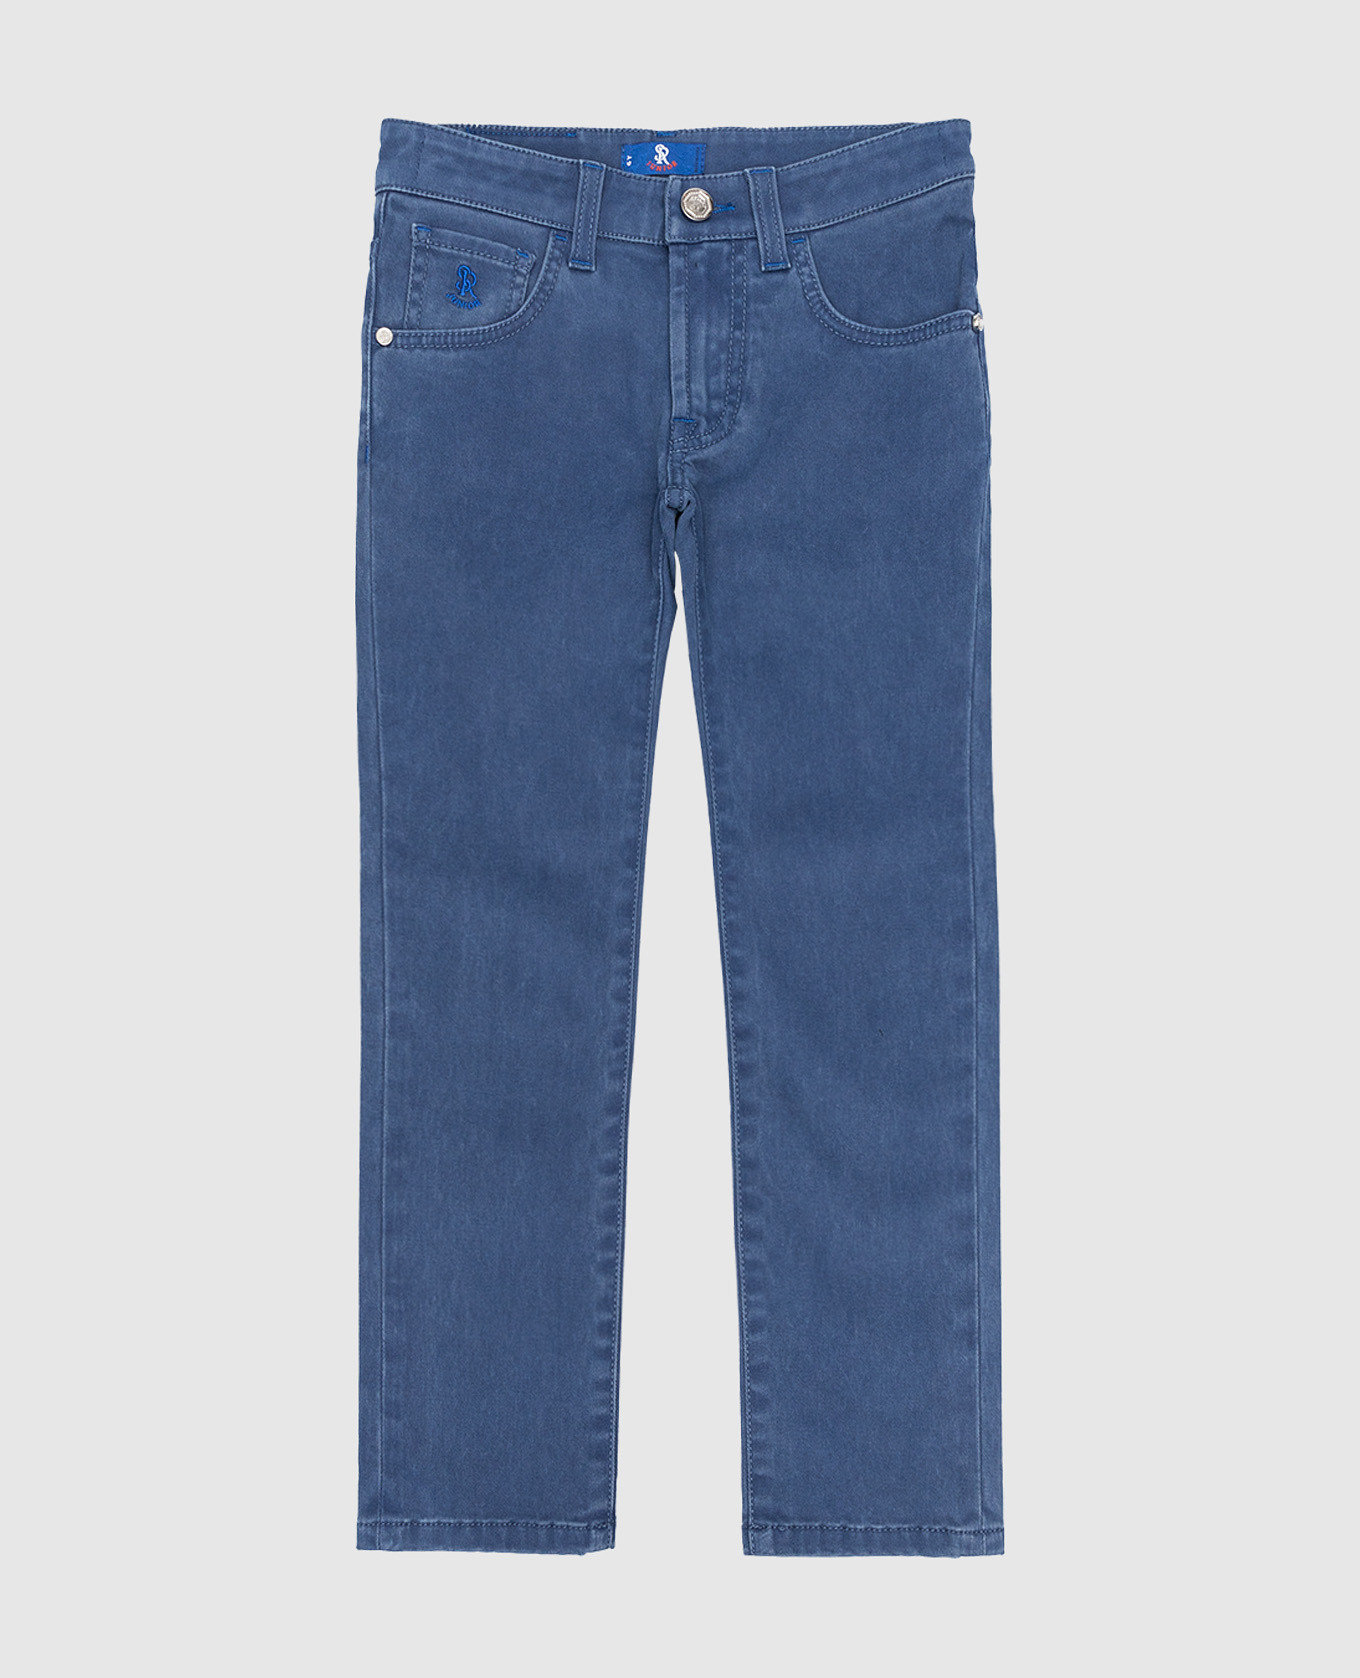 Children's blue jeans with logo